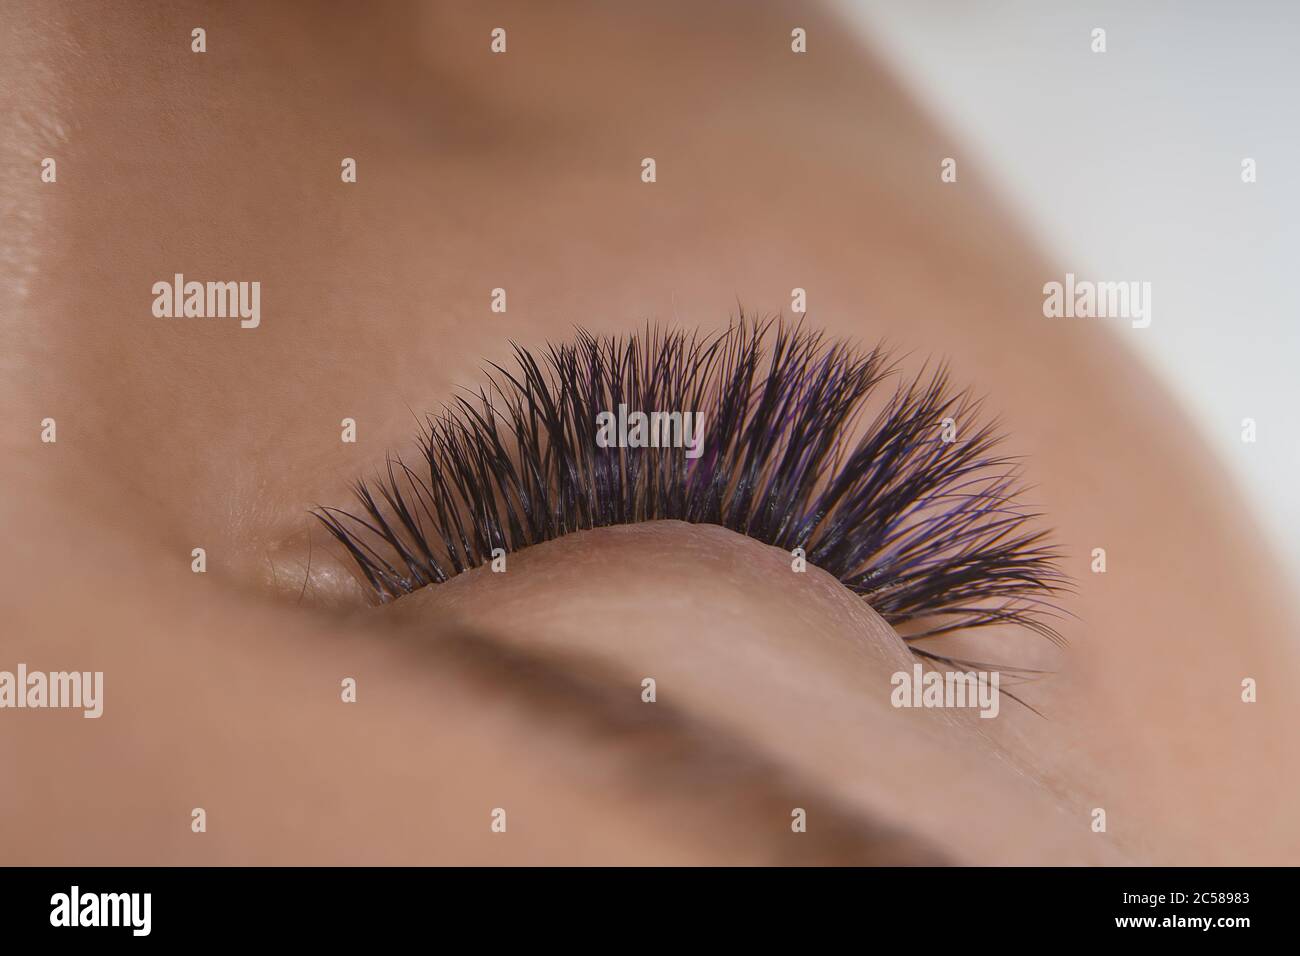 Eyelash Extension Procedure. Close up view of beautiful female eye with long eyelashes, smooth healthy skin. Stock Photo